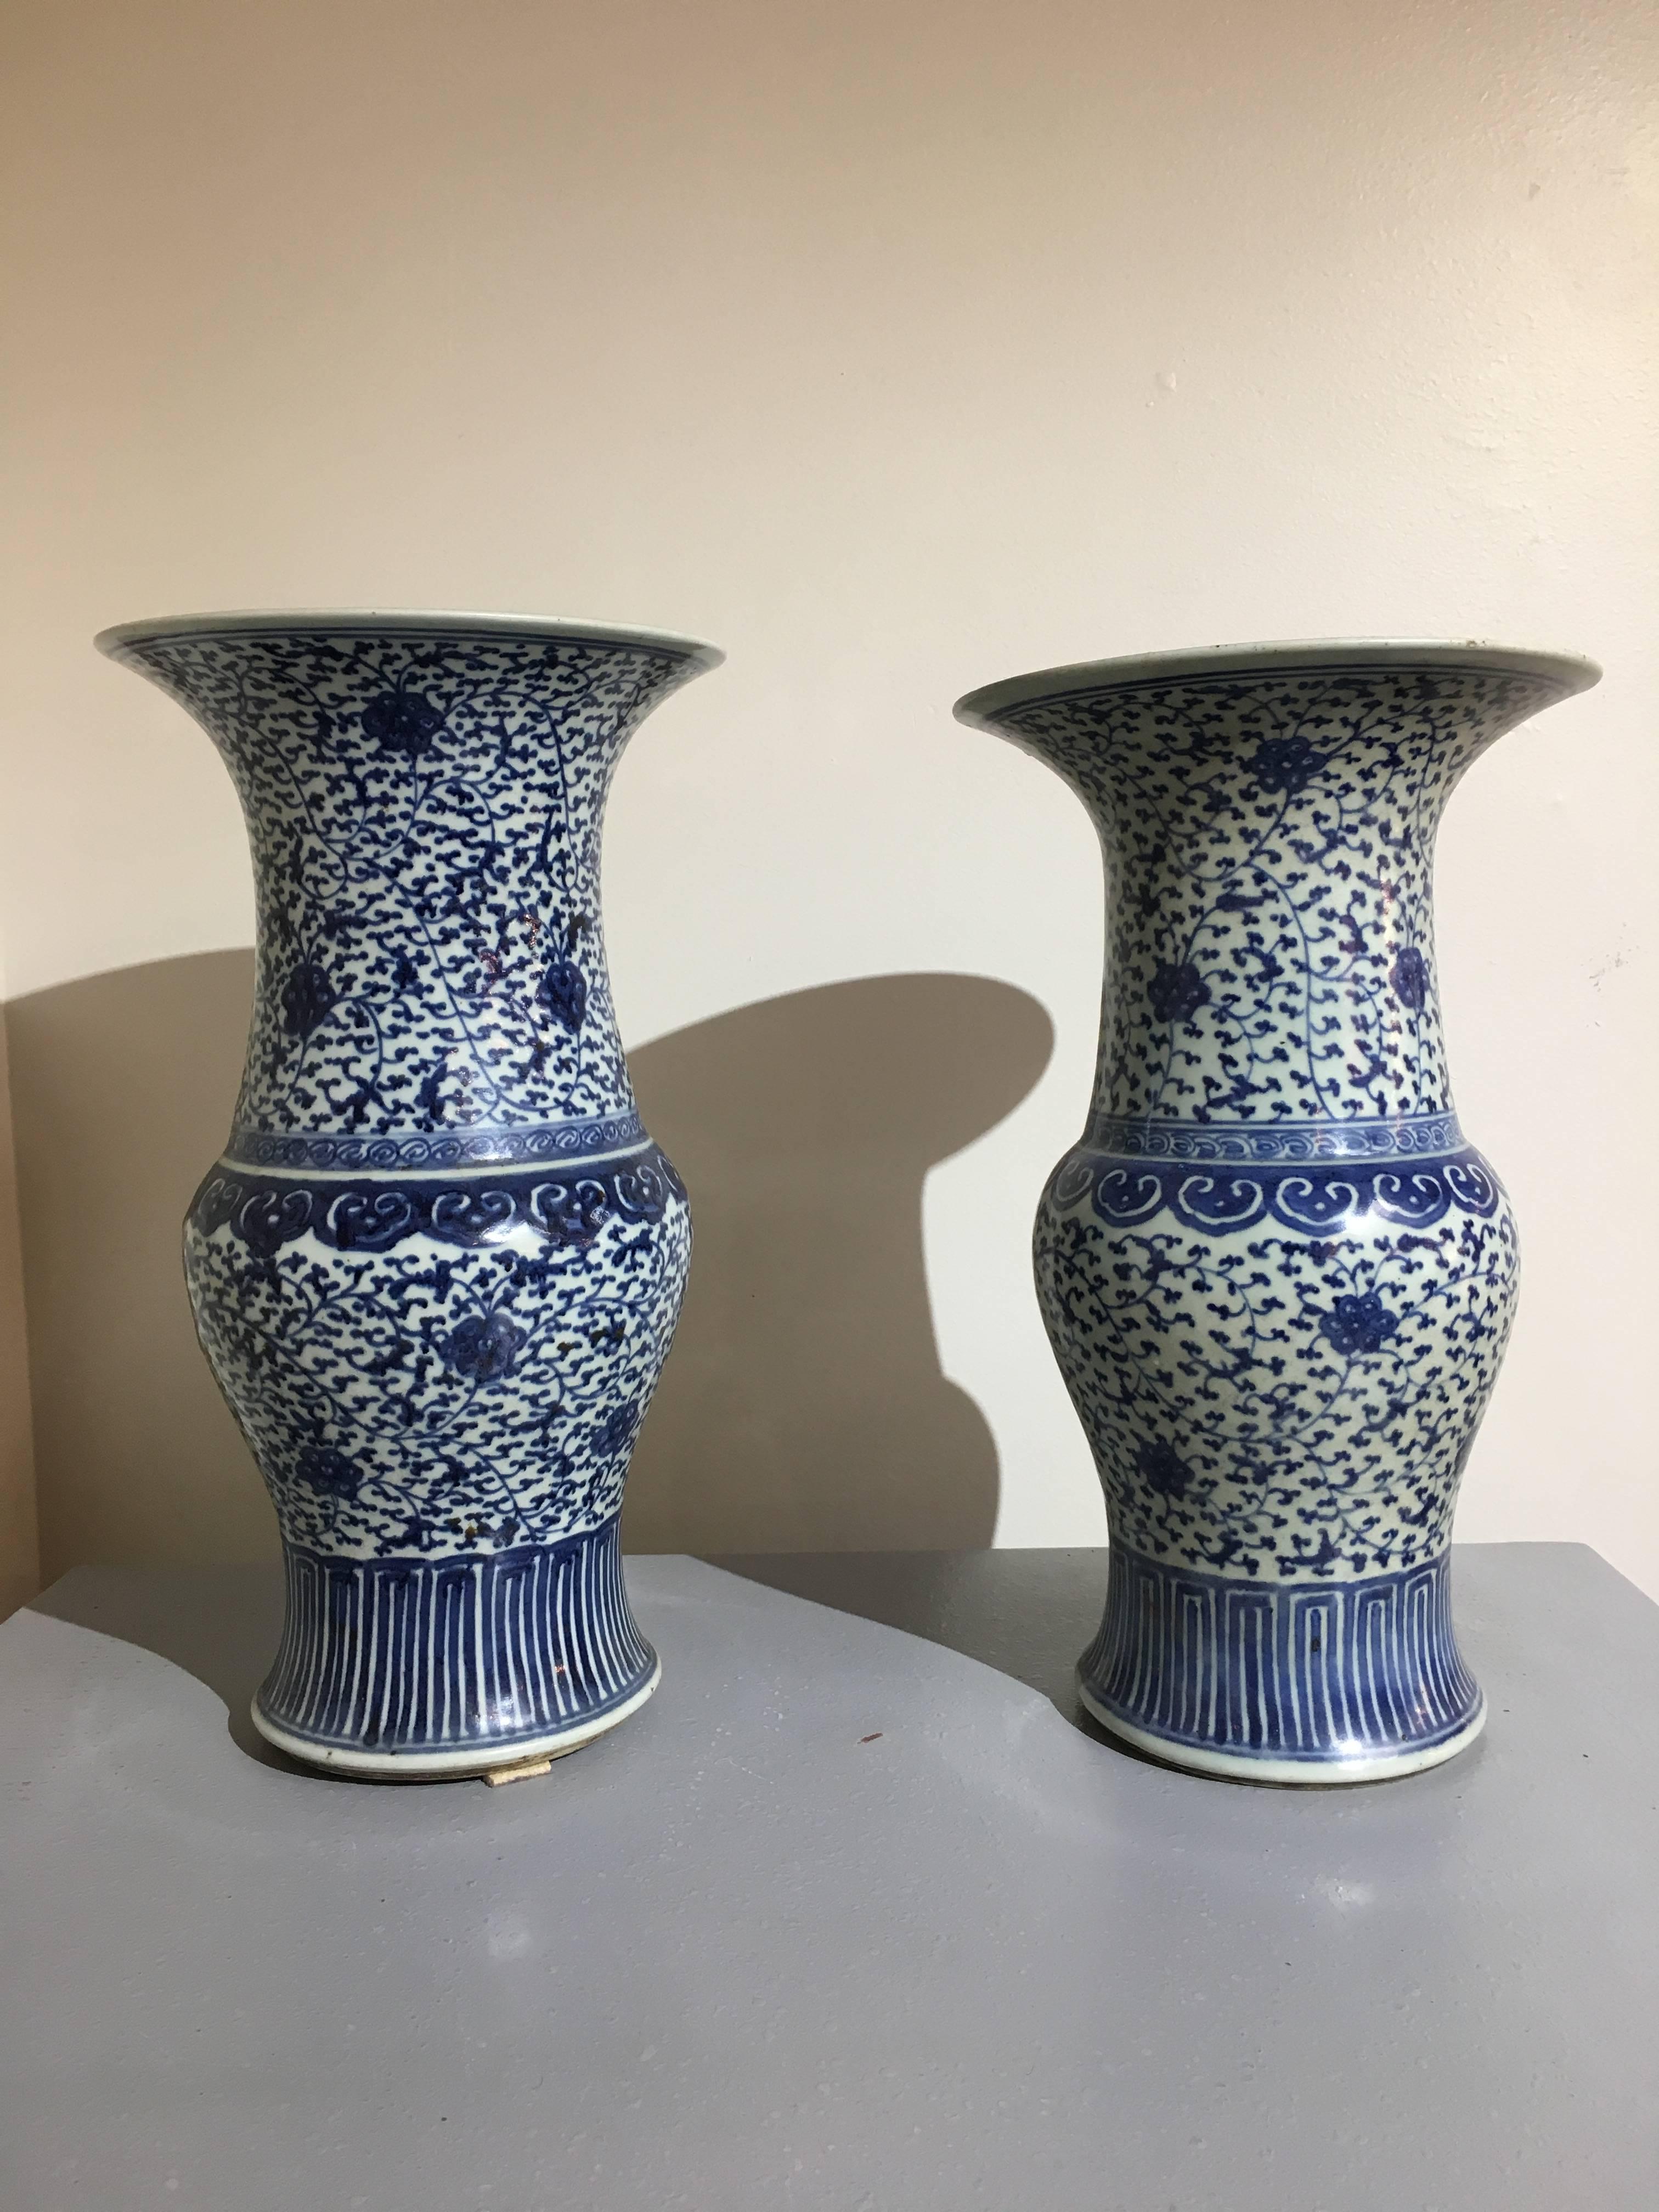 An elegant pair of Chinese blue and white yen yen vases, also called phoenix tail vases. The bodies of baluster form, with wide necks that end in dramatic flaring mouths. Decorated in underglaze blue in a scrolling floral and foliate motif. The